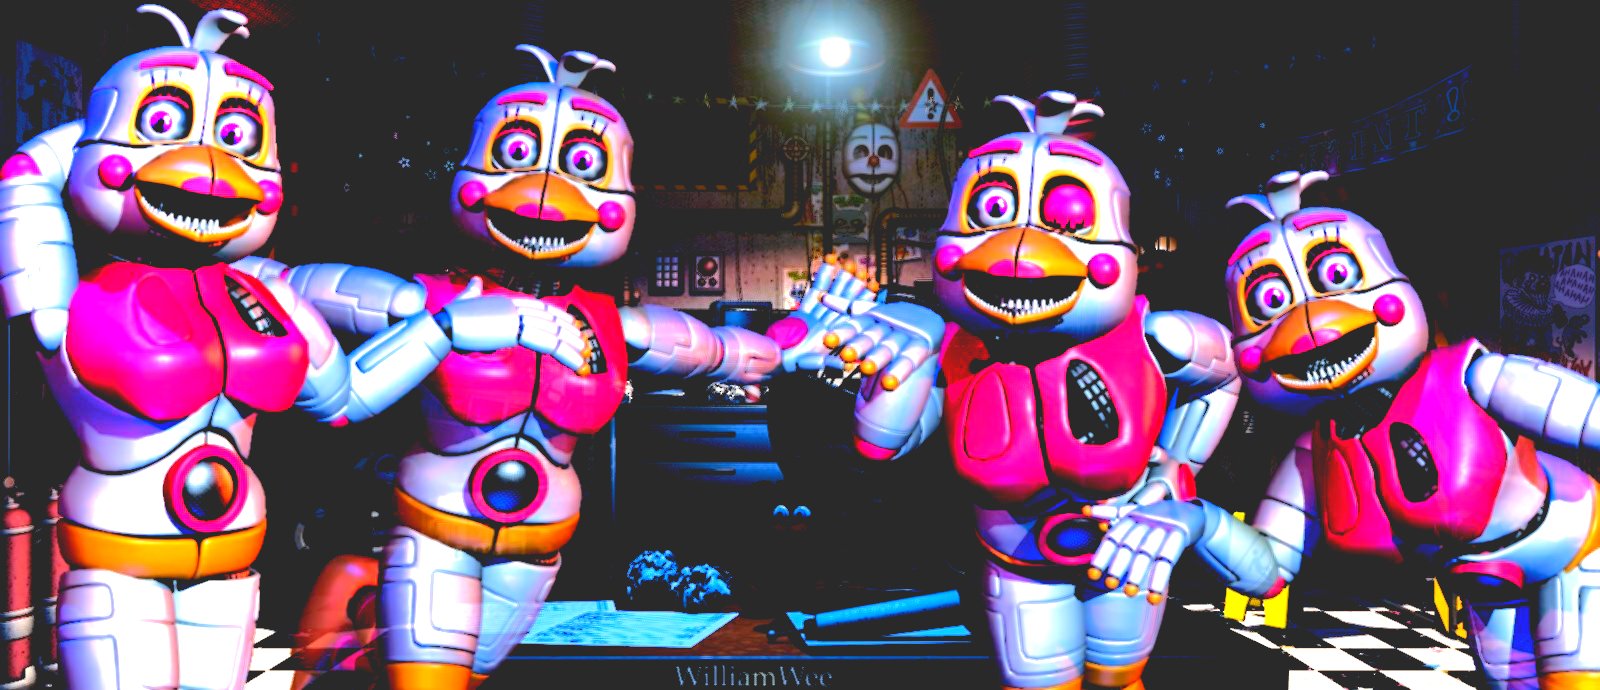 Funtime Chica by cat00nz on DeviantArt